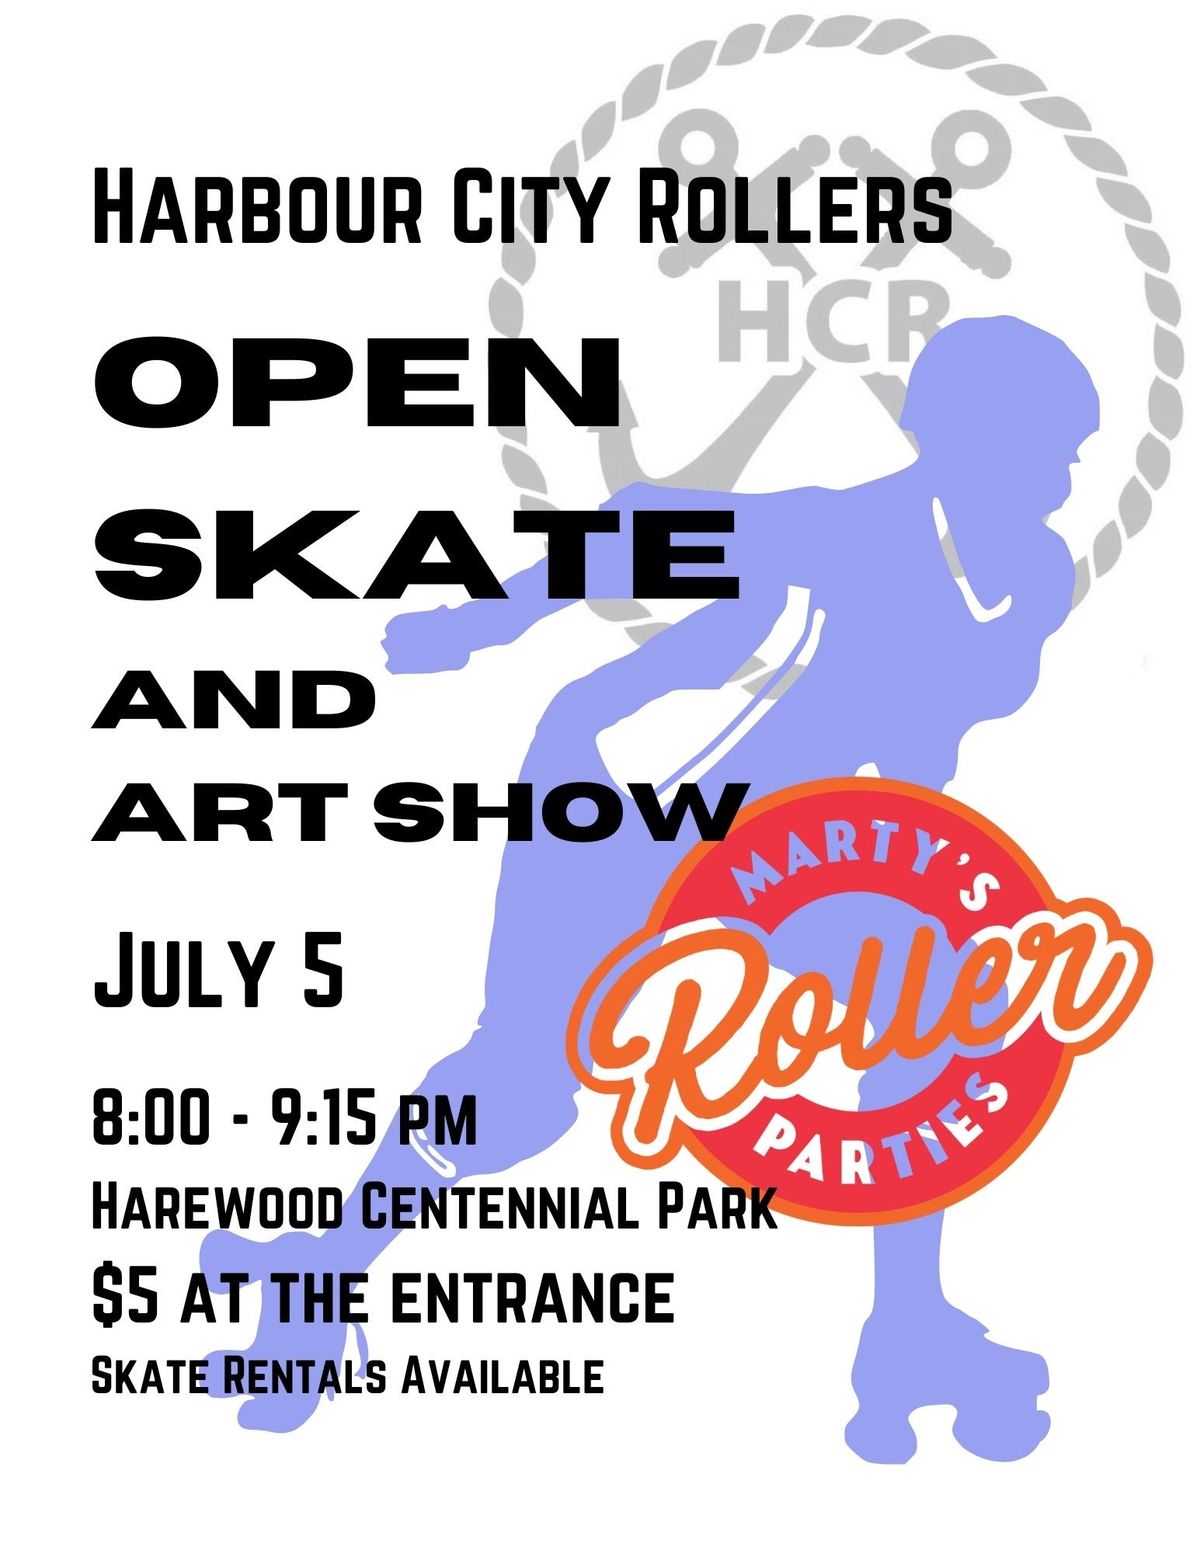 Harbour City Rollers Open Skate and Art Show